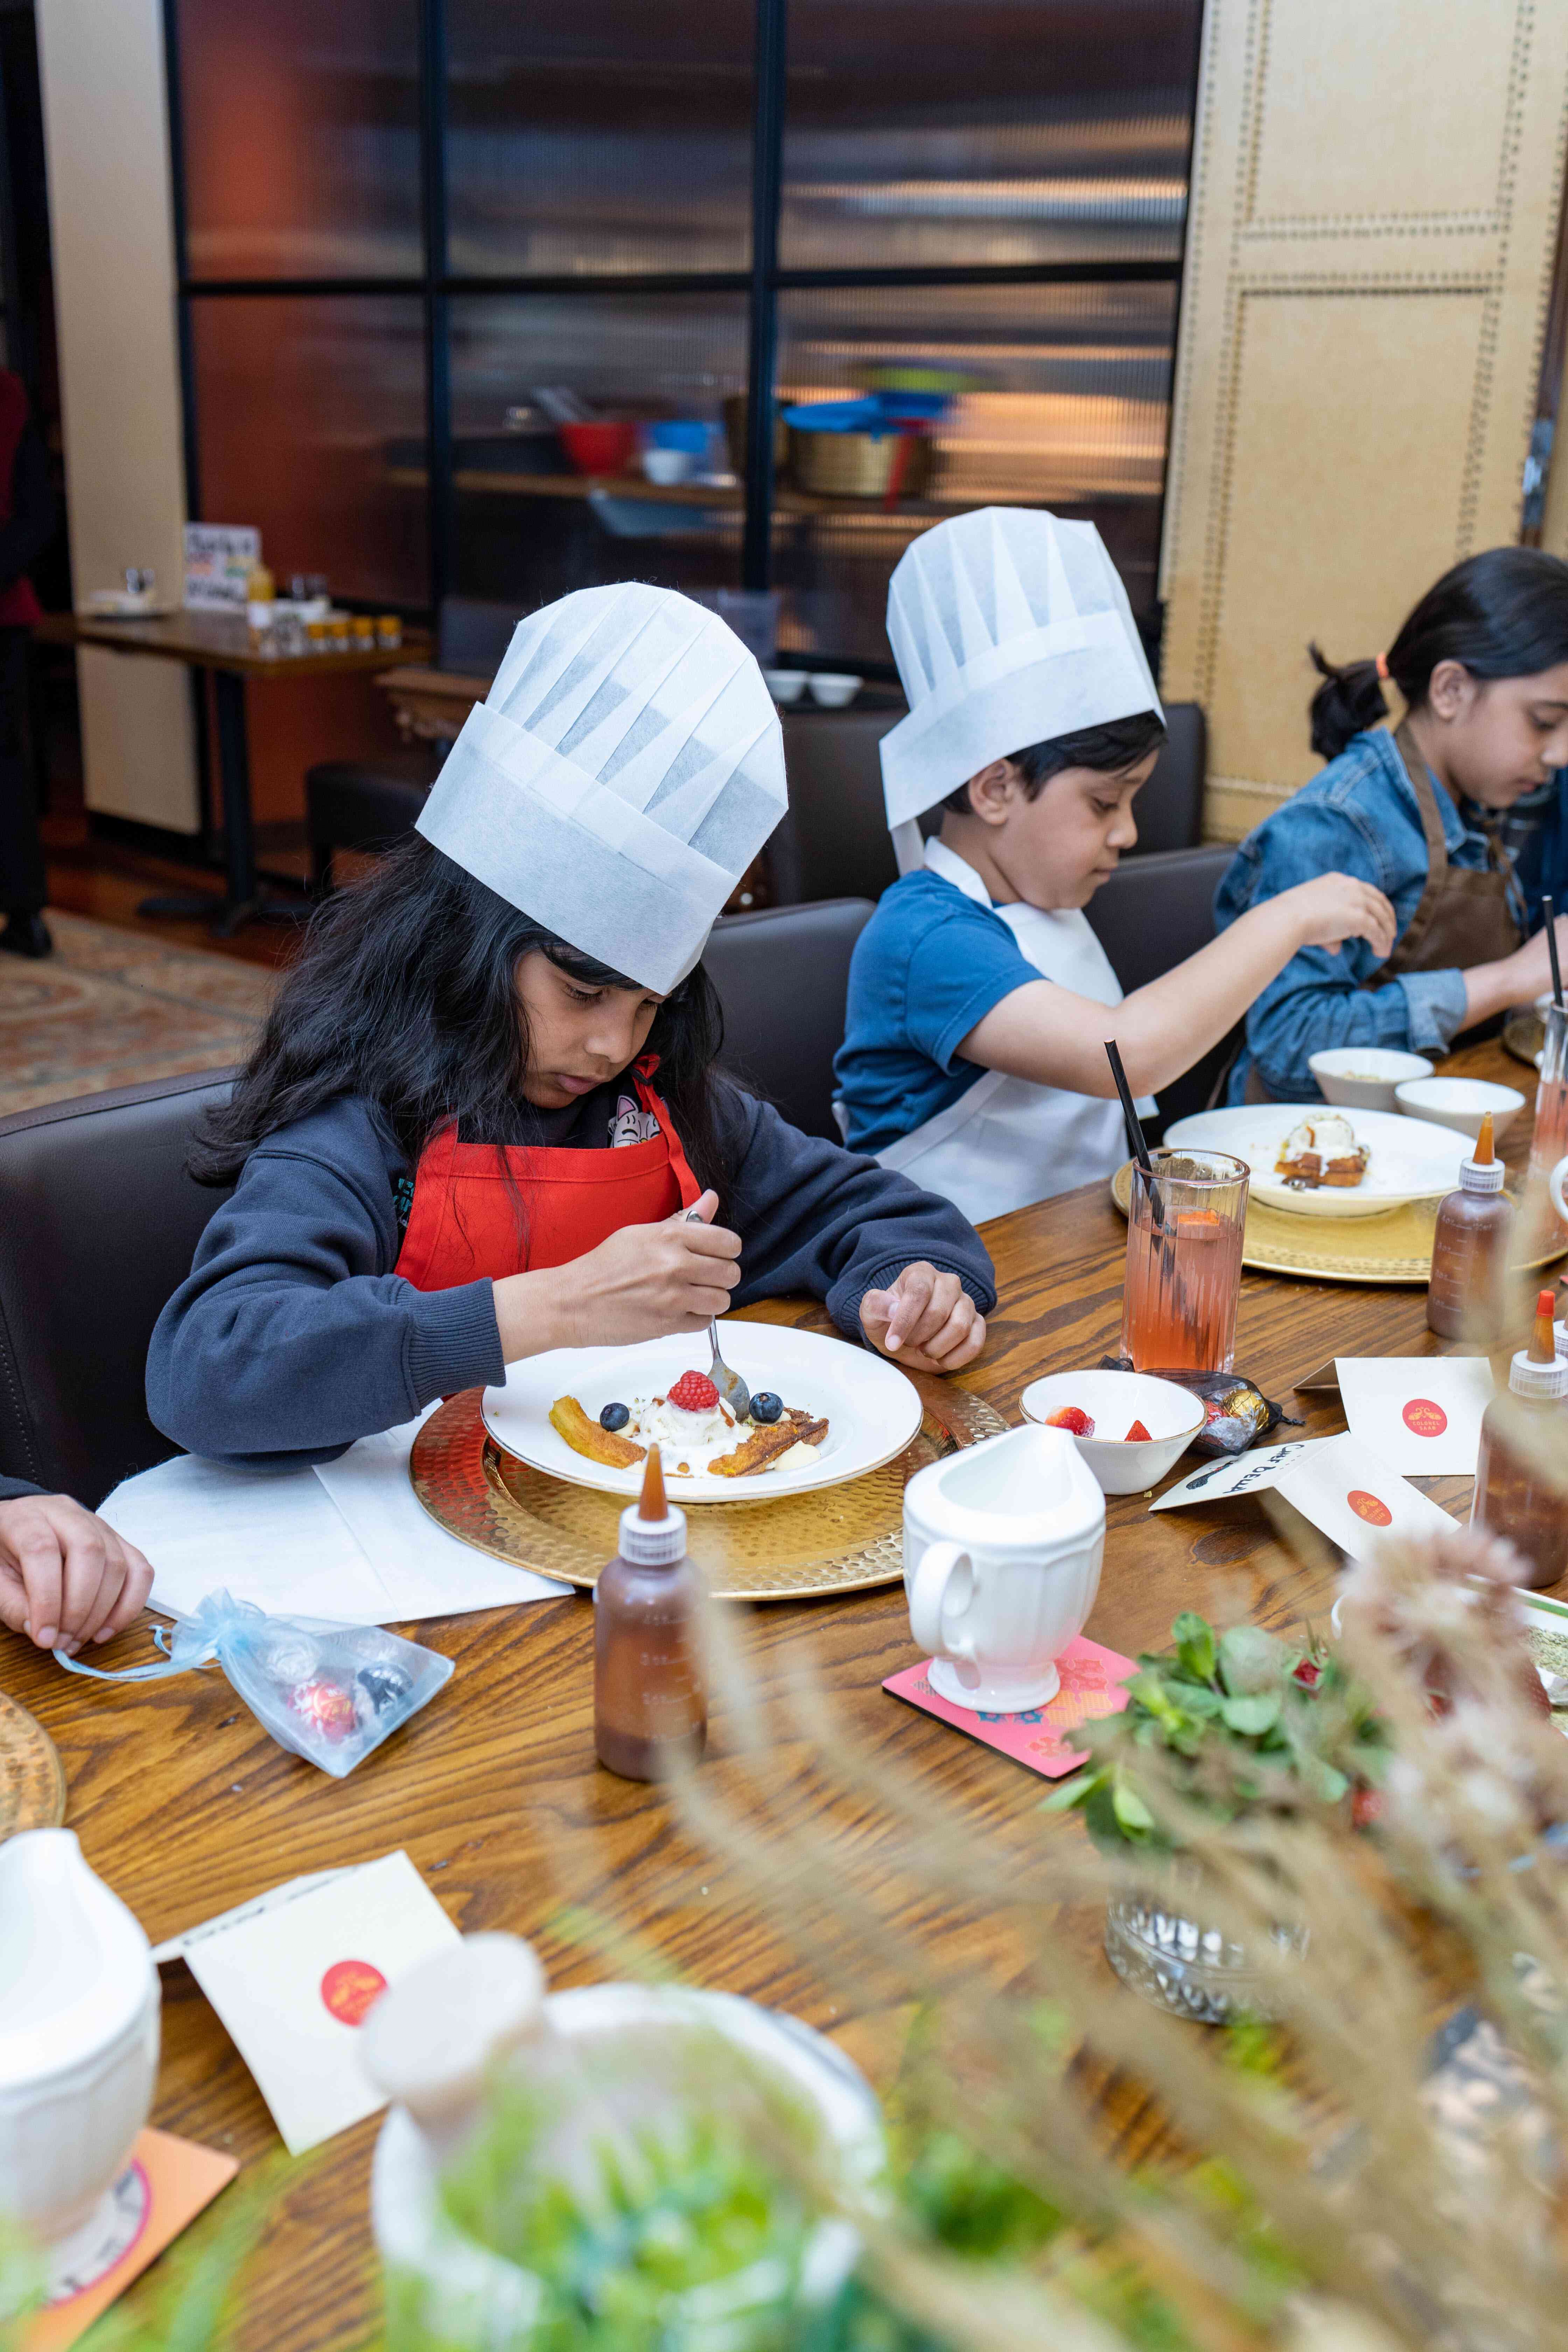 Colonel Saab Presents: Halloween Art and Cookery Master Class for Kids